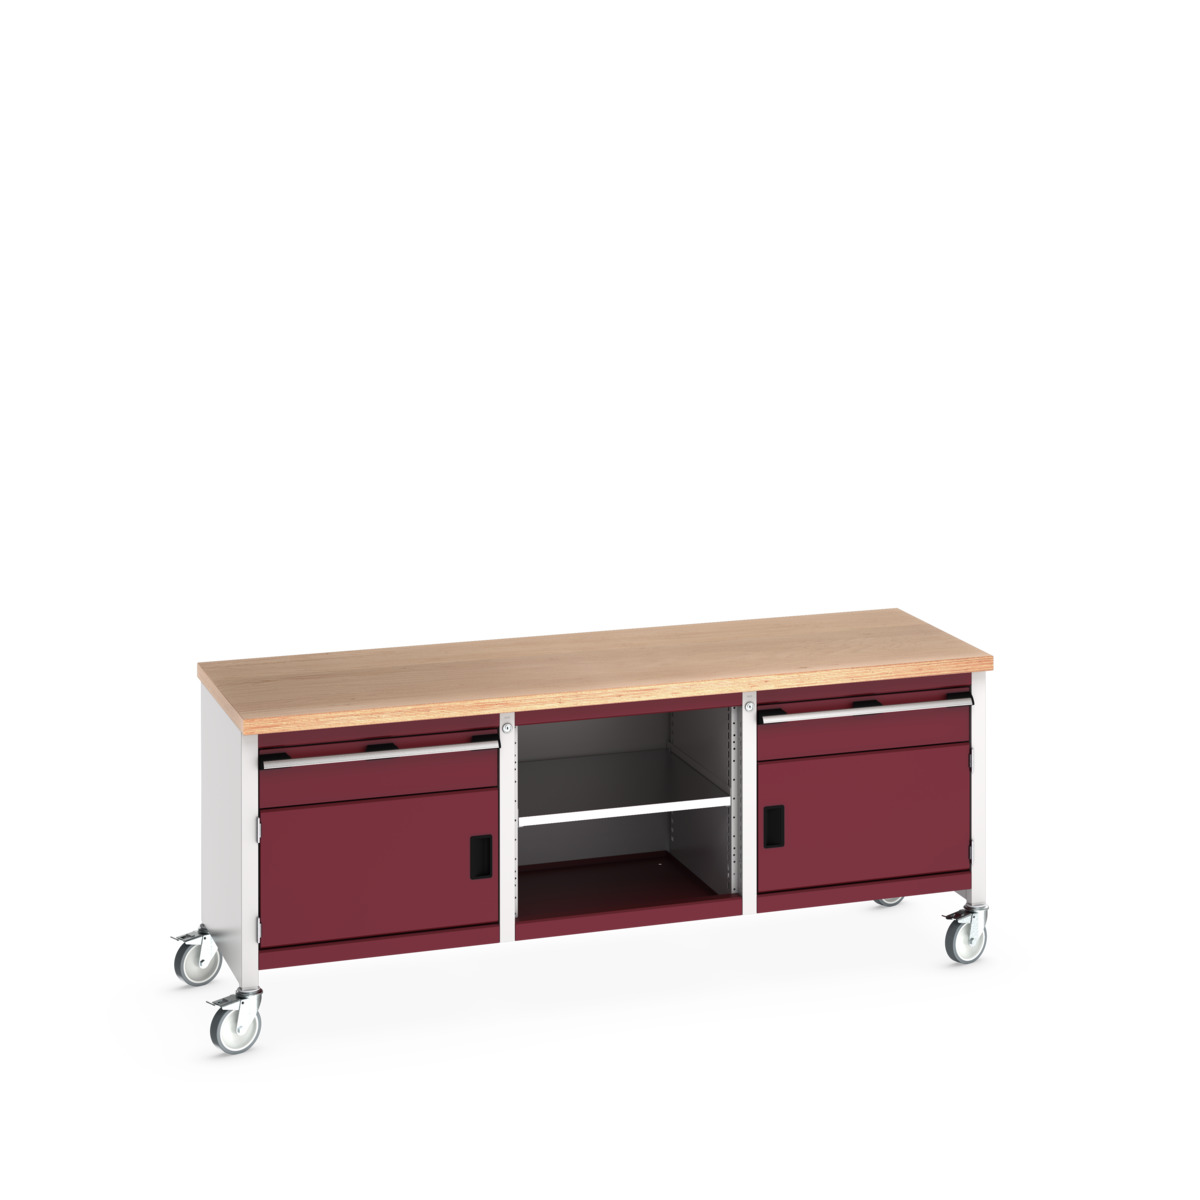 41002121.24V - cubio mobile storage bench (mpx)